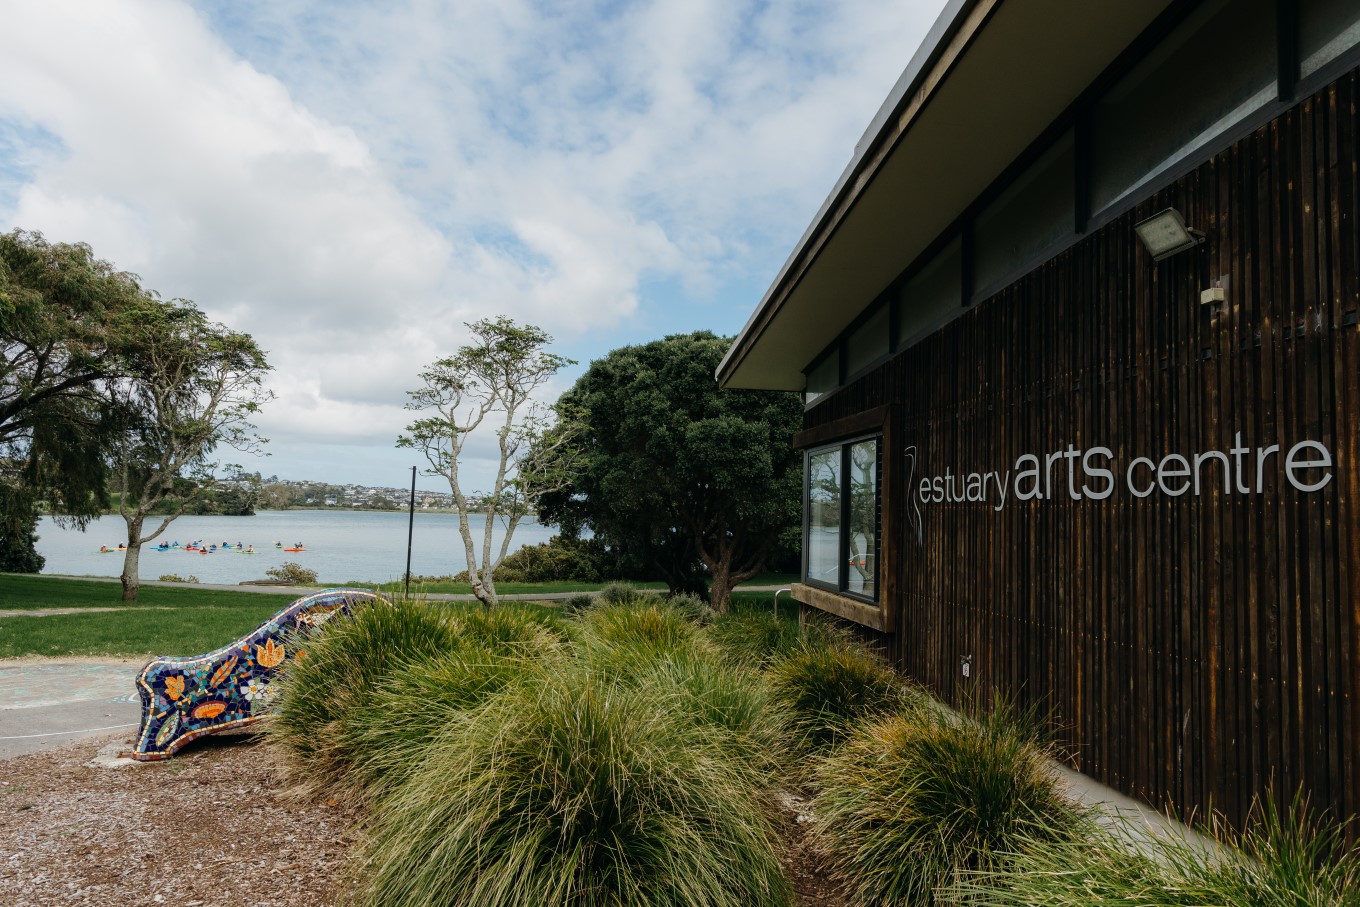 Stop for a coffee and view the art at Estuary Arts Centre.